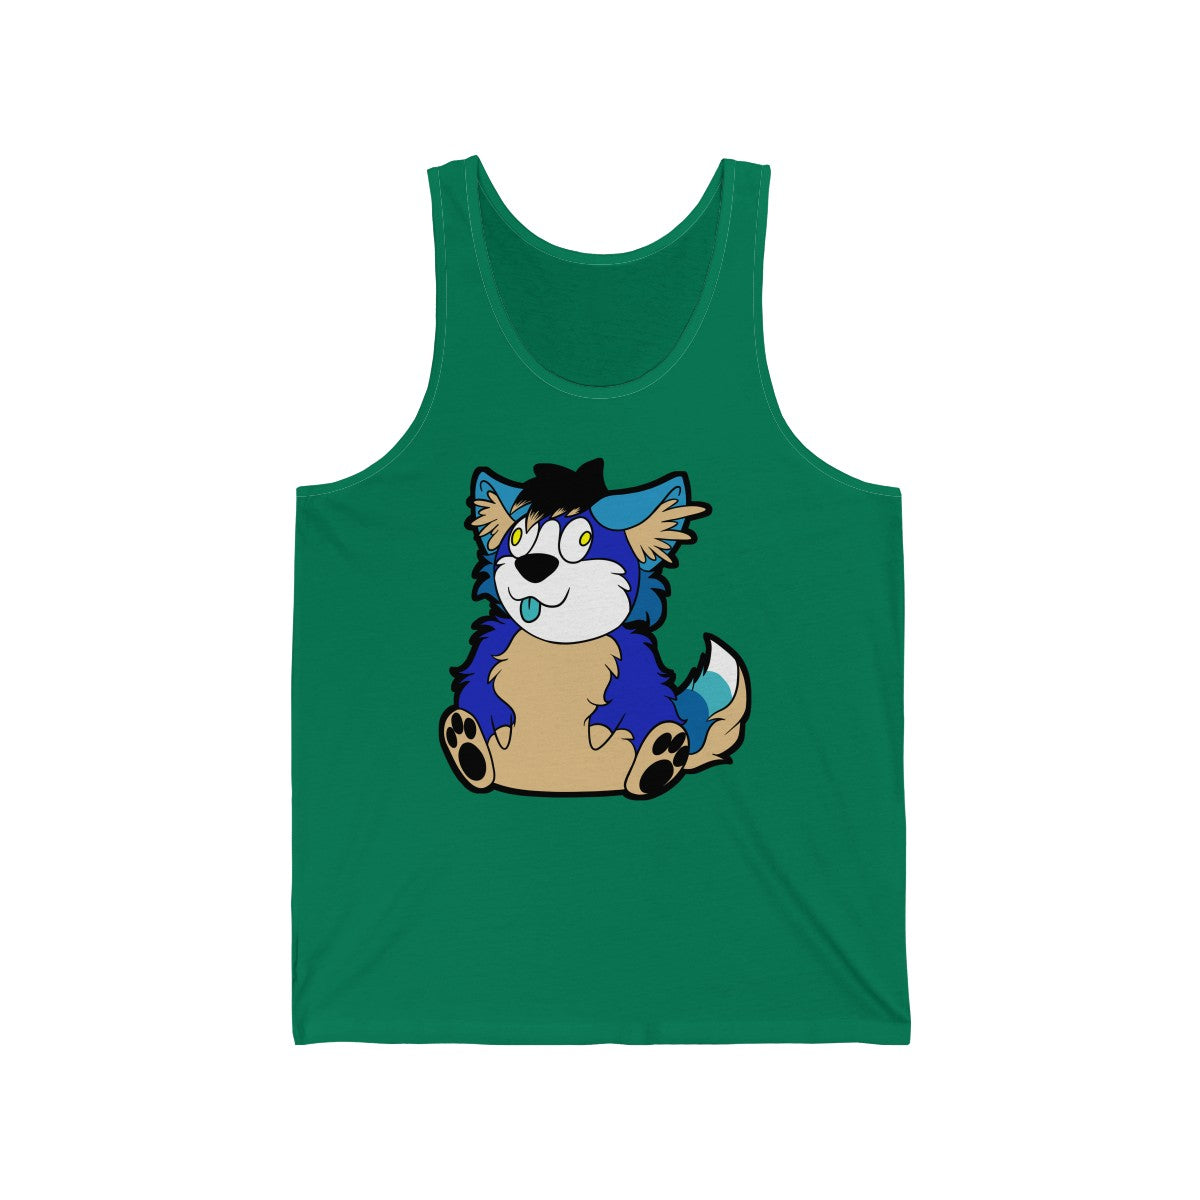 Thicc Boi No Text - Tank Top Tank Top AFLT-Hund The Hound Green XS 